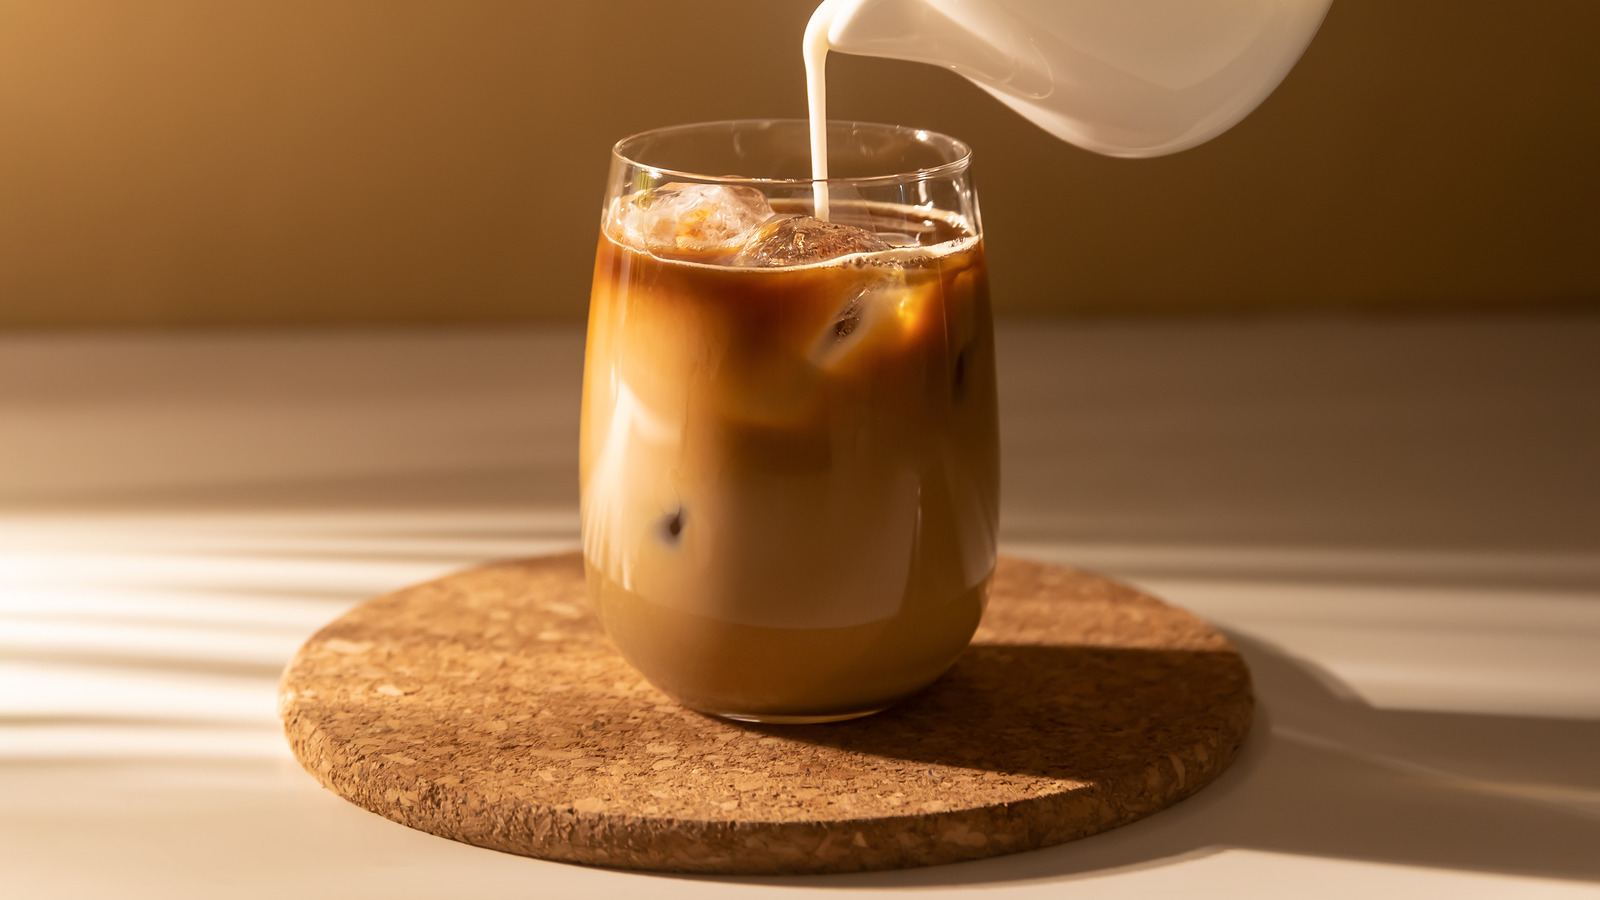 https://www.tastingtable.com/img/gallery/why-its-so-important-to-store-cold-brew-coffee-in-an-airtight-container/l-intro-1650478140.jpg